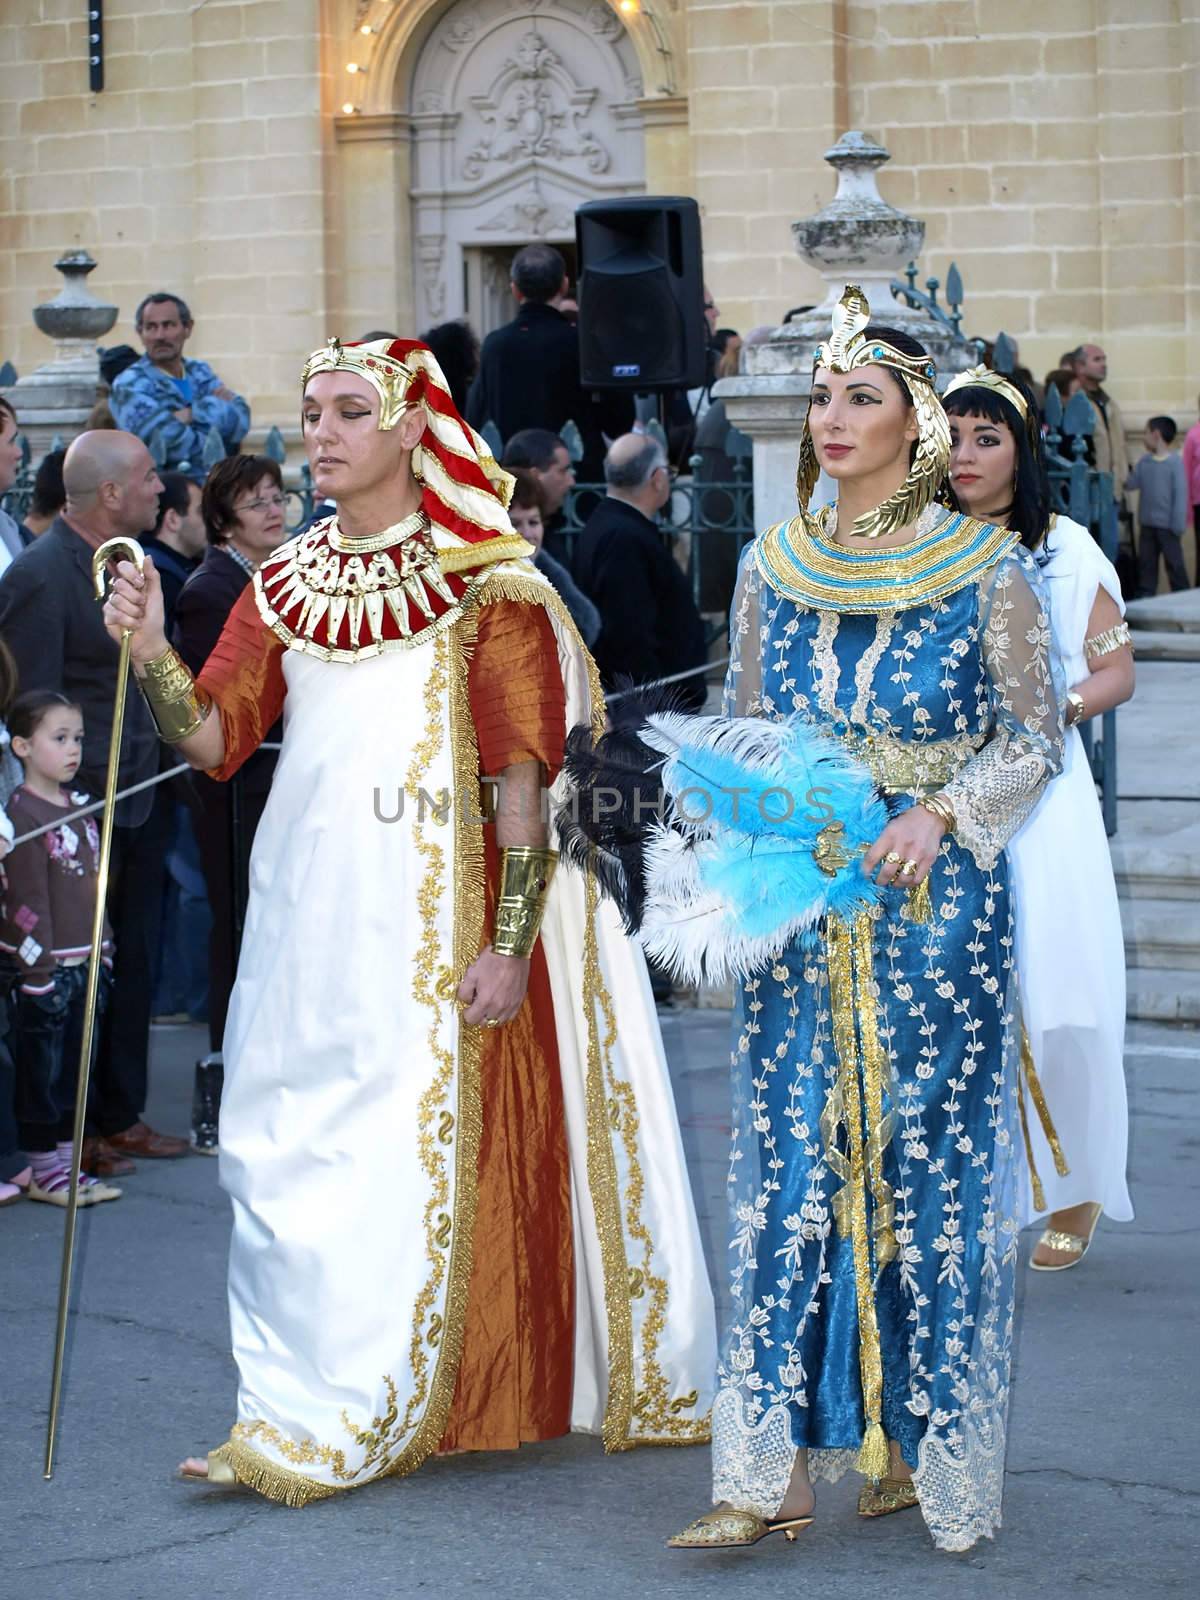 People dressed up as Egyptian rulers during reenactment of Biblical times  